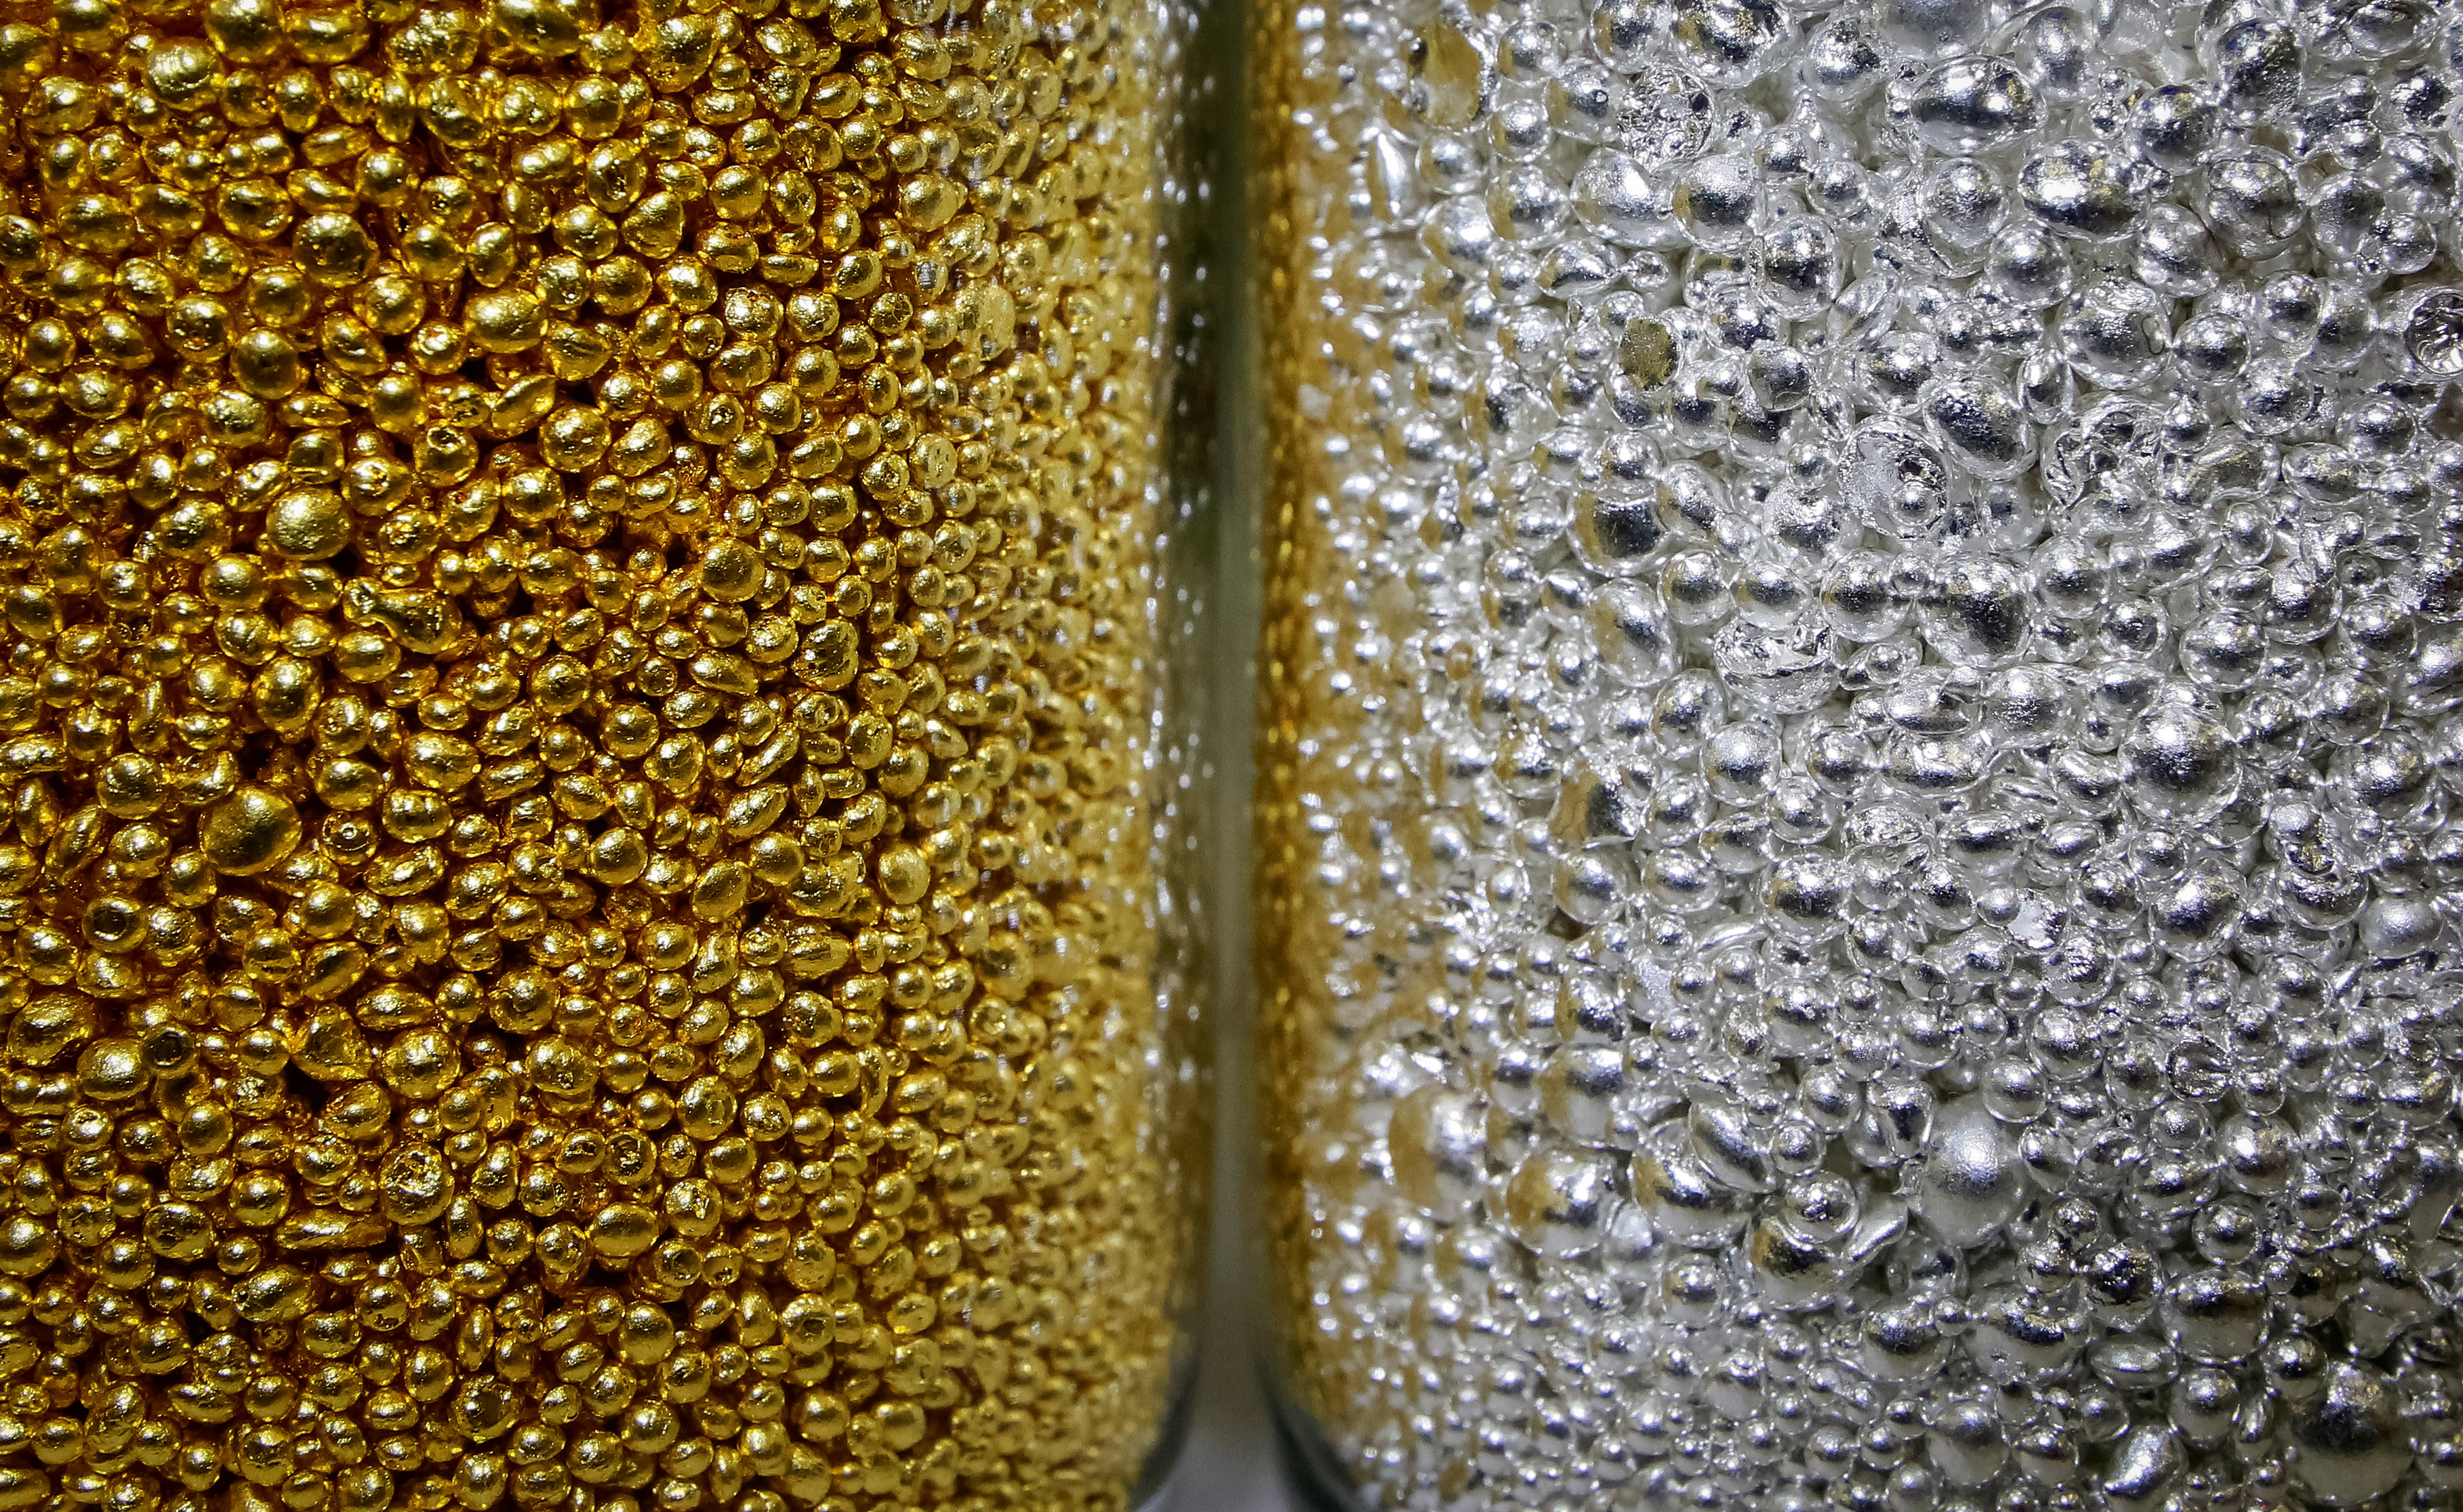 Granules of 99.99 percent pure gold and silver are seen in glass jars at the Krastsvetmet non-ferrous metals plant in the Siberian city of Krasnoyarsk